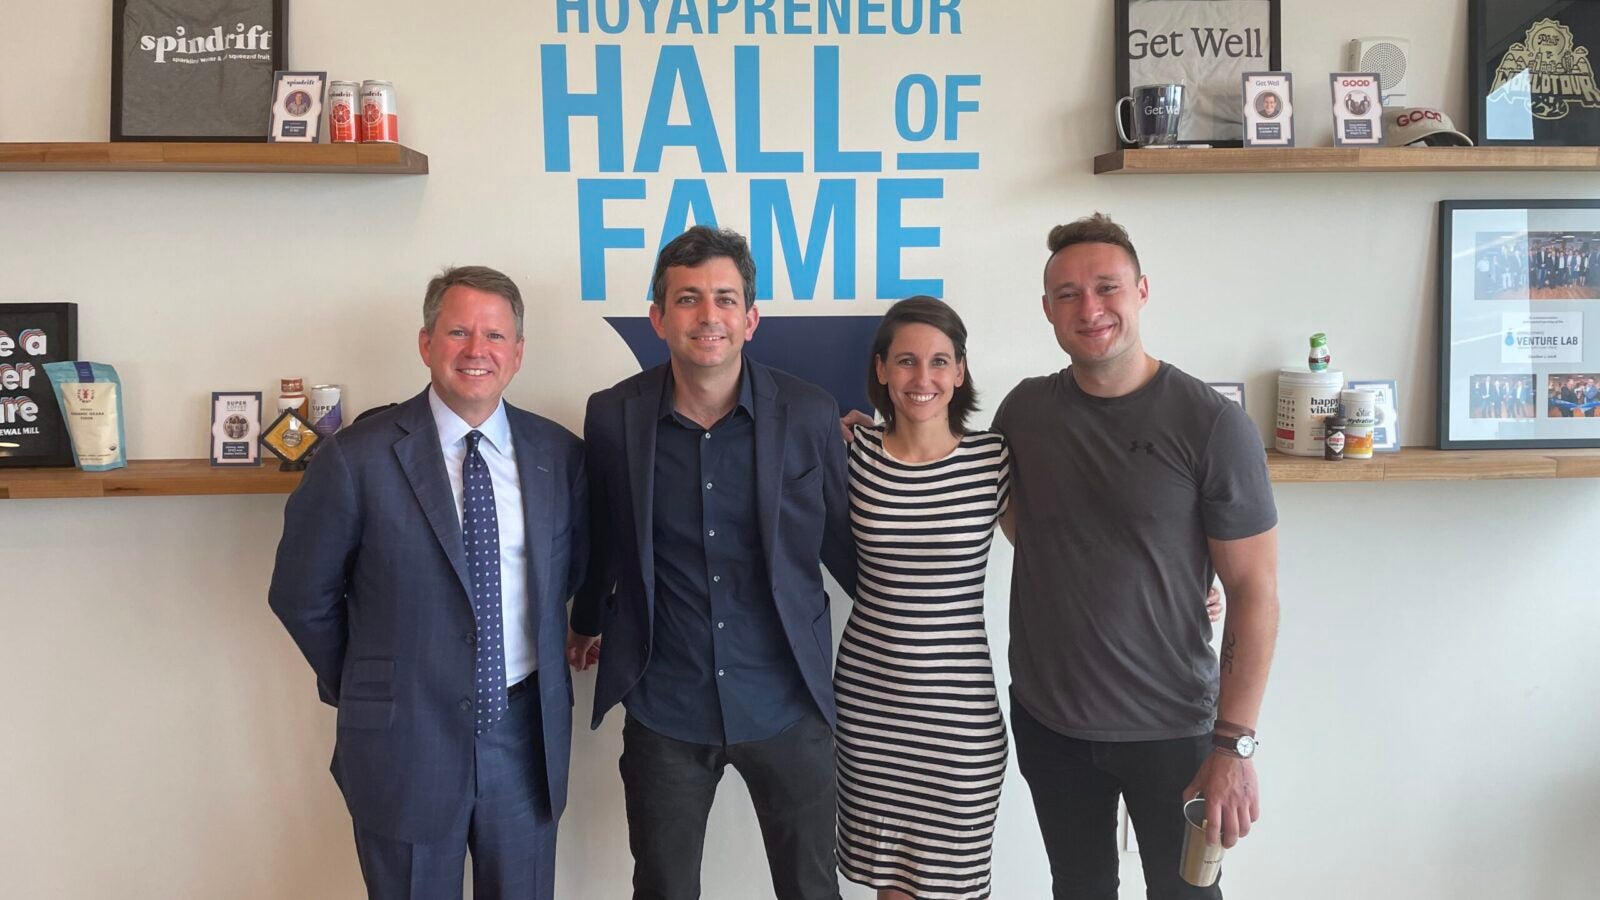 Michael Brown, Emily Owen, Etai Mizrav, and Mackenzie Copley stand in the Georgetown Vanture Lab in front of a wall reading “Hoyapreneur Hall of Fame.”